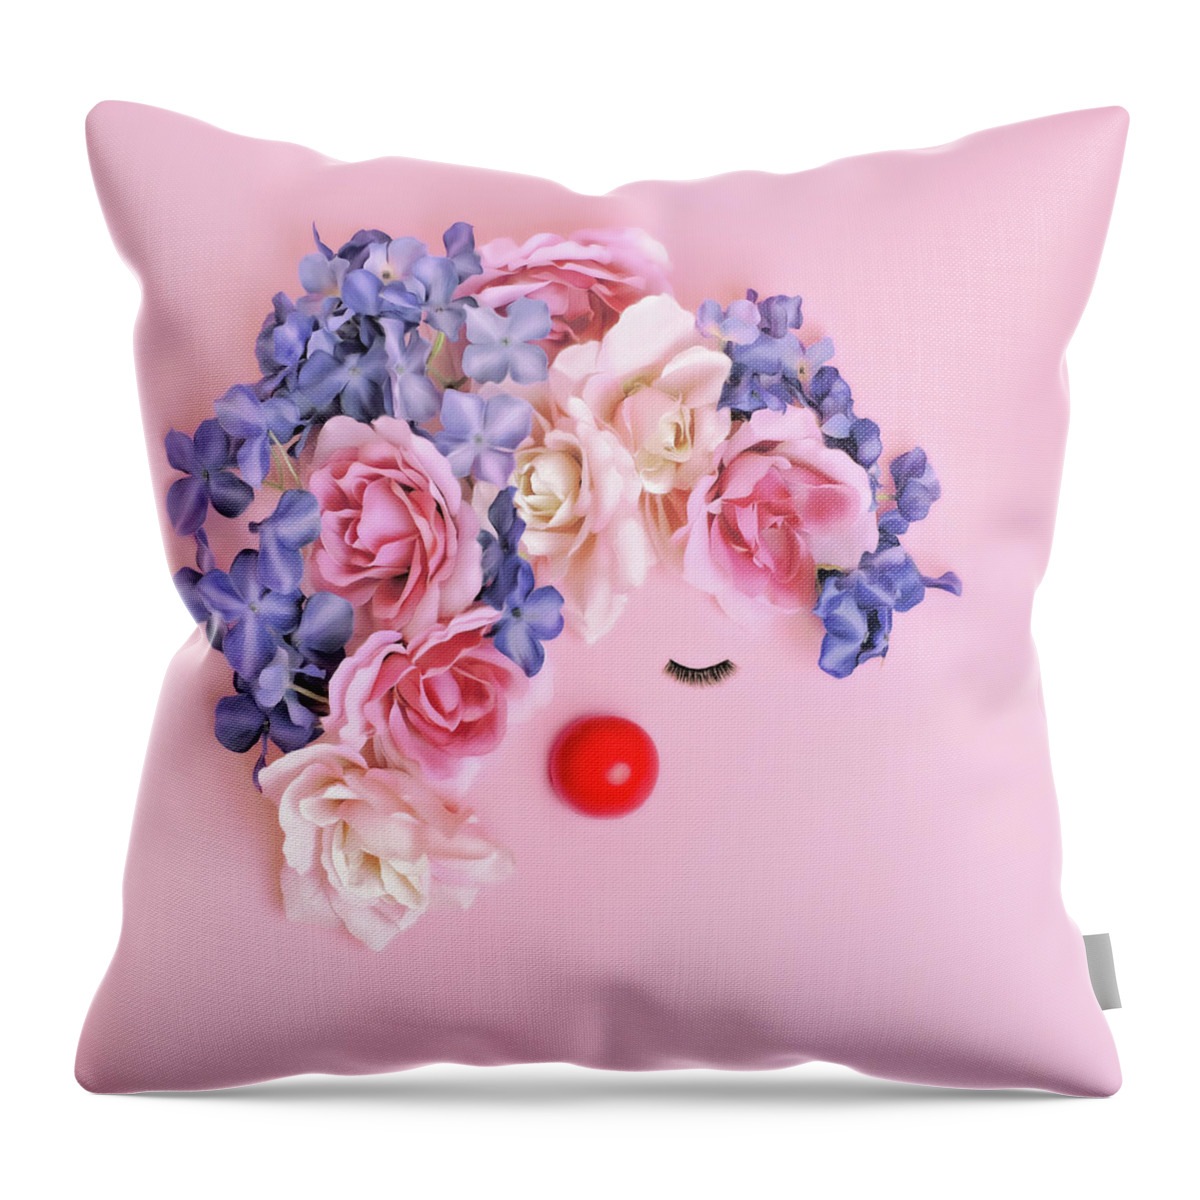 Clown's Nose Throw Pillow featuring the photograph Face Made From Flowers And False by Juj Winn